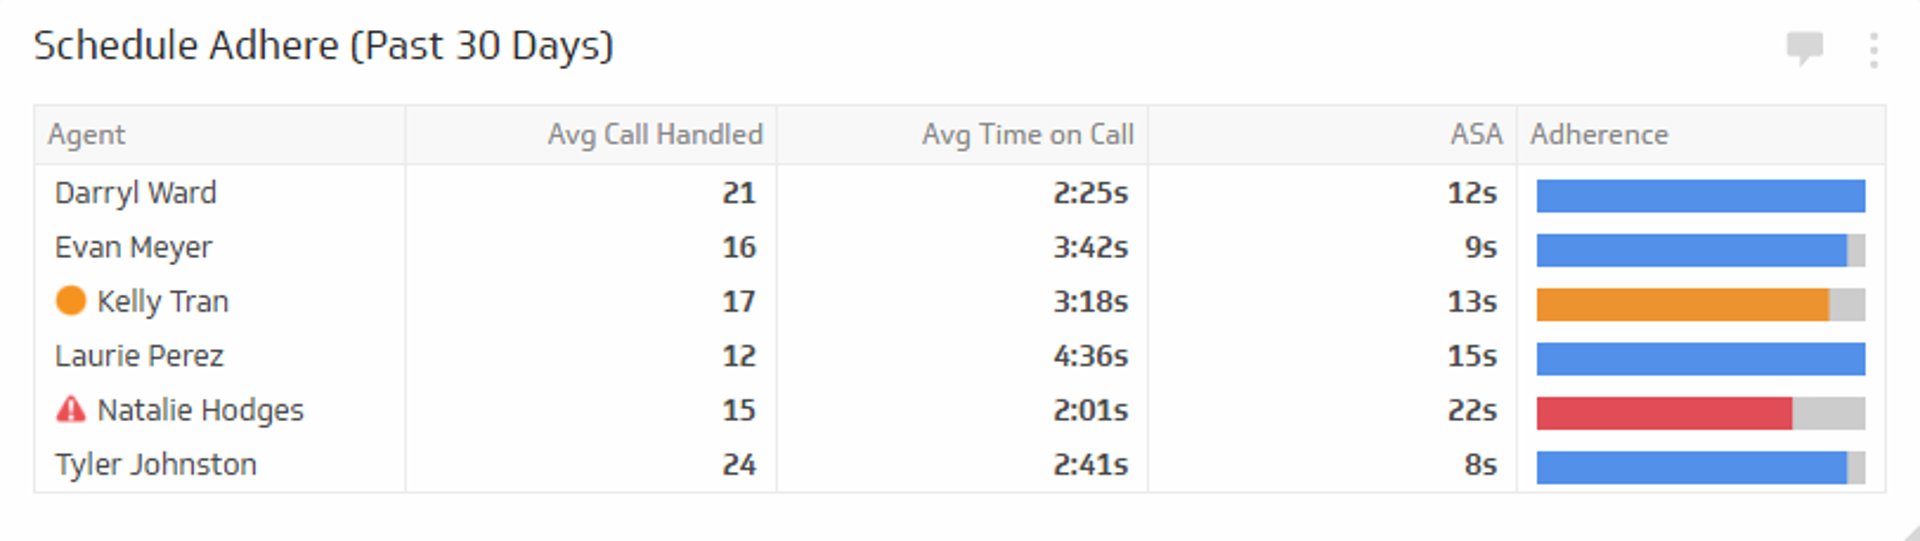 Call Center KPI Example - Agent Schedule Adherence Metric